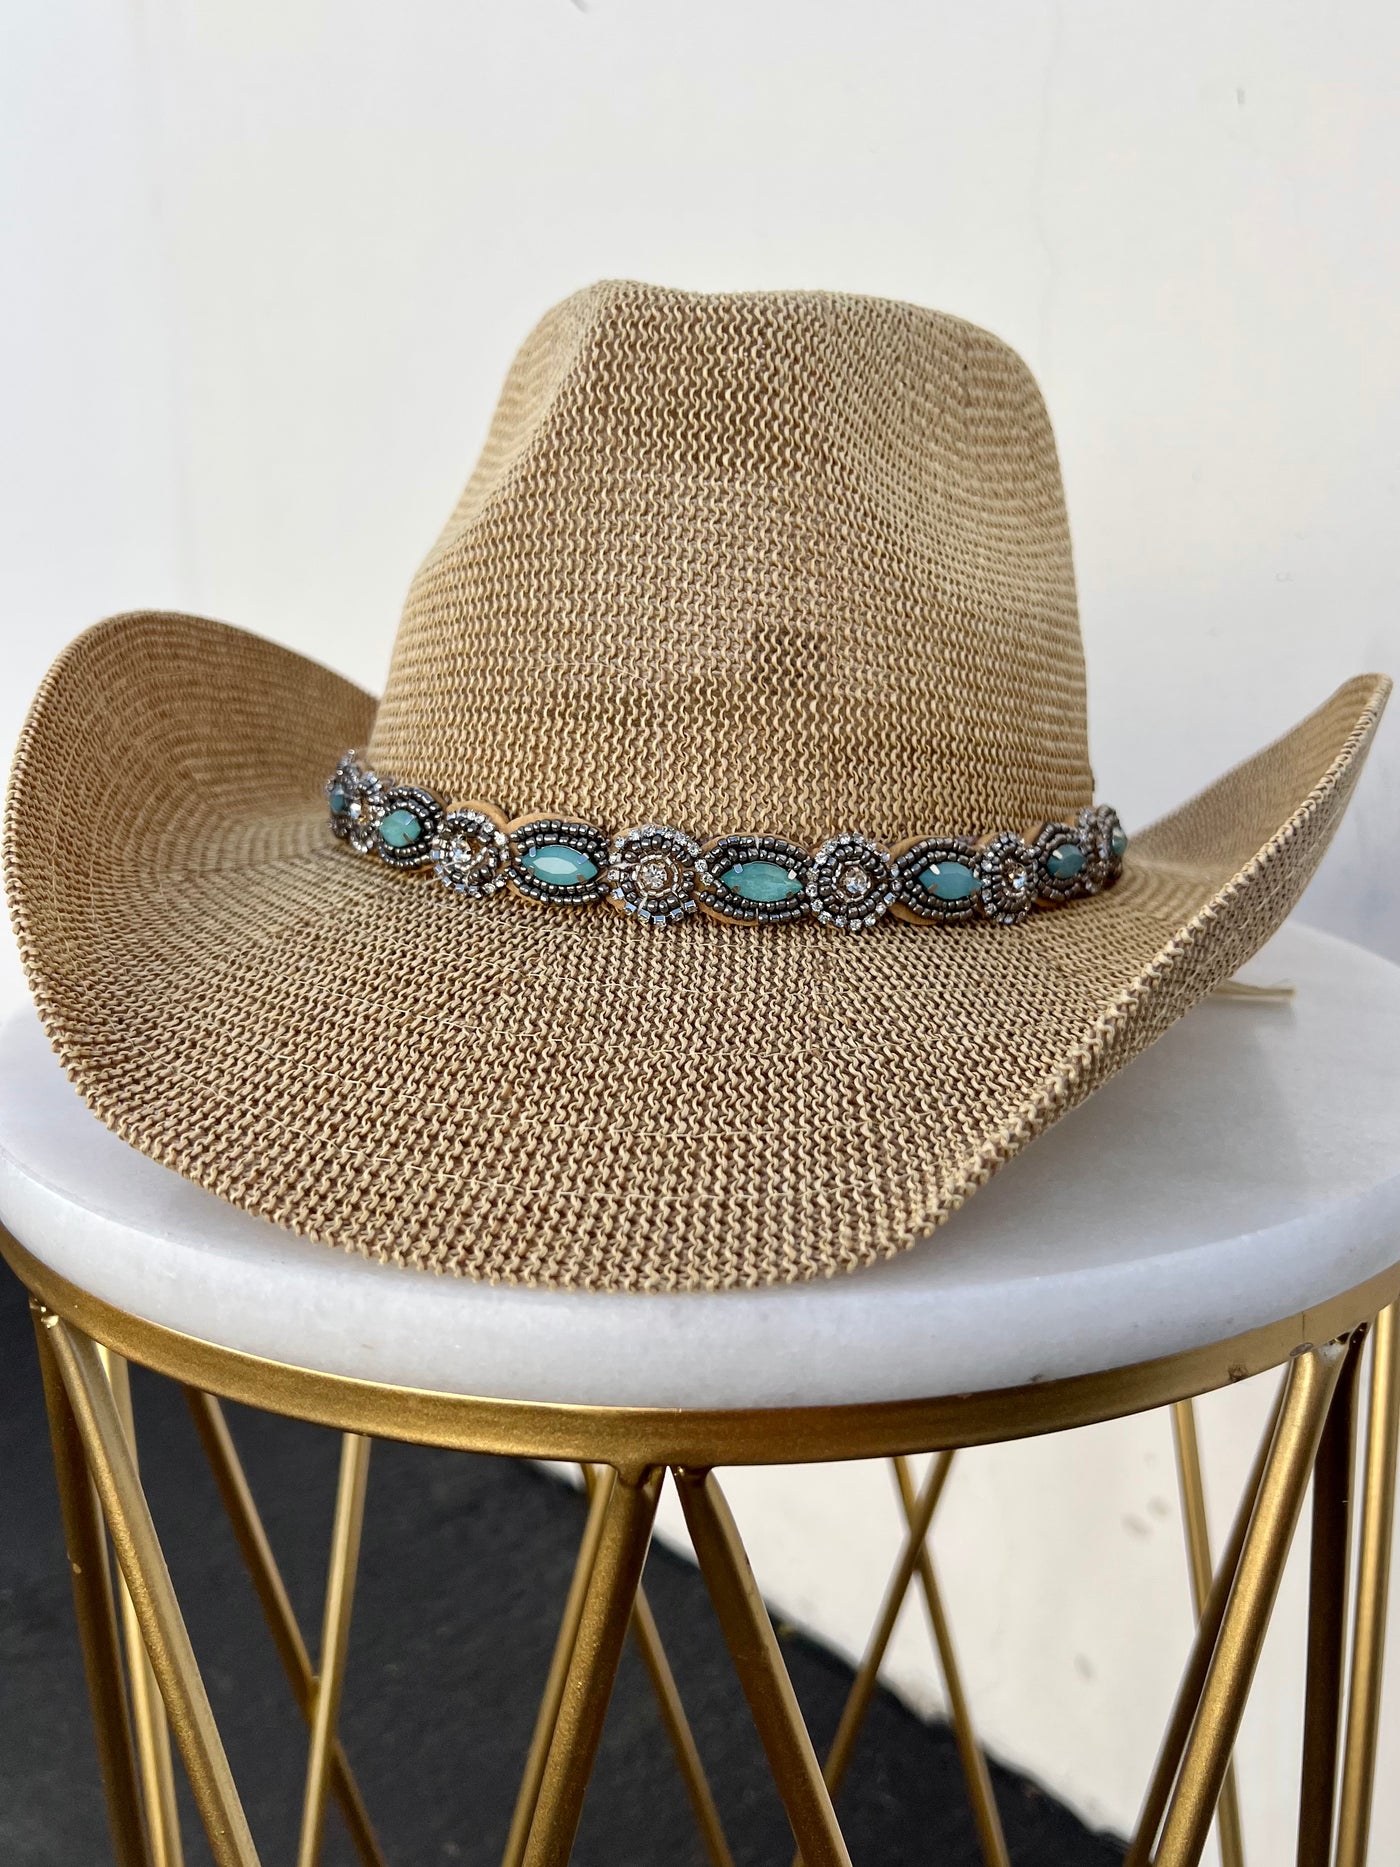 Cowgirl By The Coast - Cowboy Hat with Rhinestone Hat Band